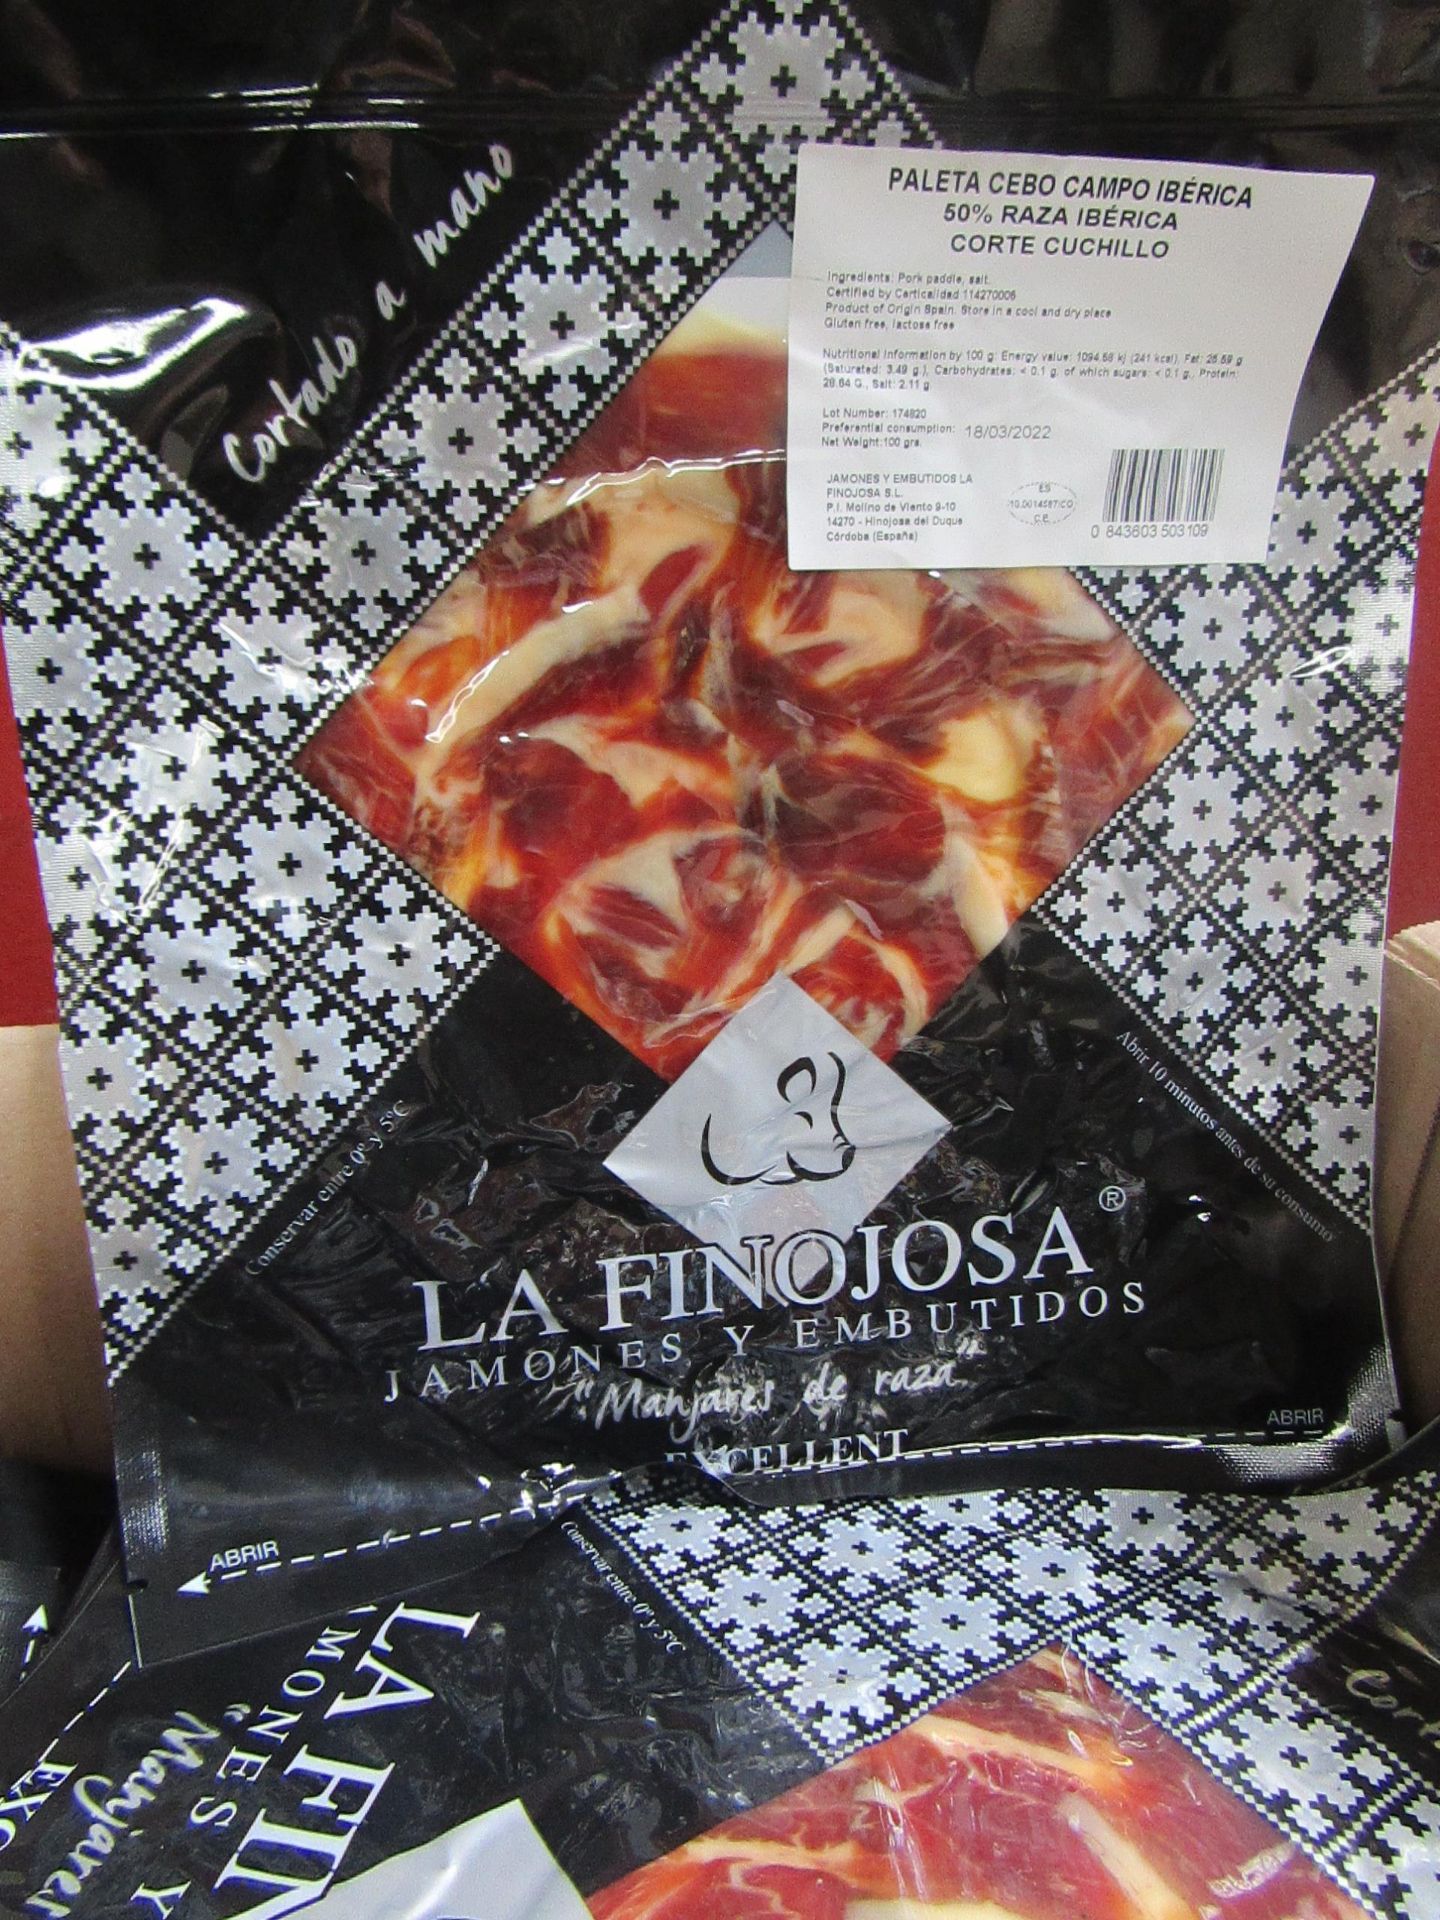 5 x La Finojosa 100g packets Sliced Iberian cured ham in slices. BB 18.3.22 RRP £16.25 per packet on